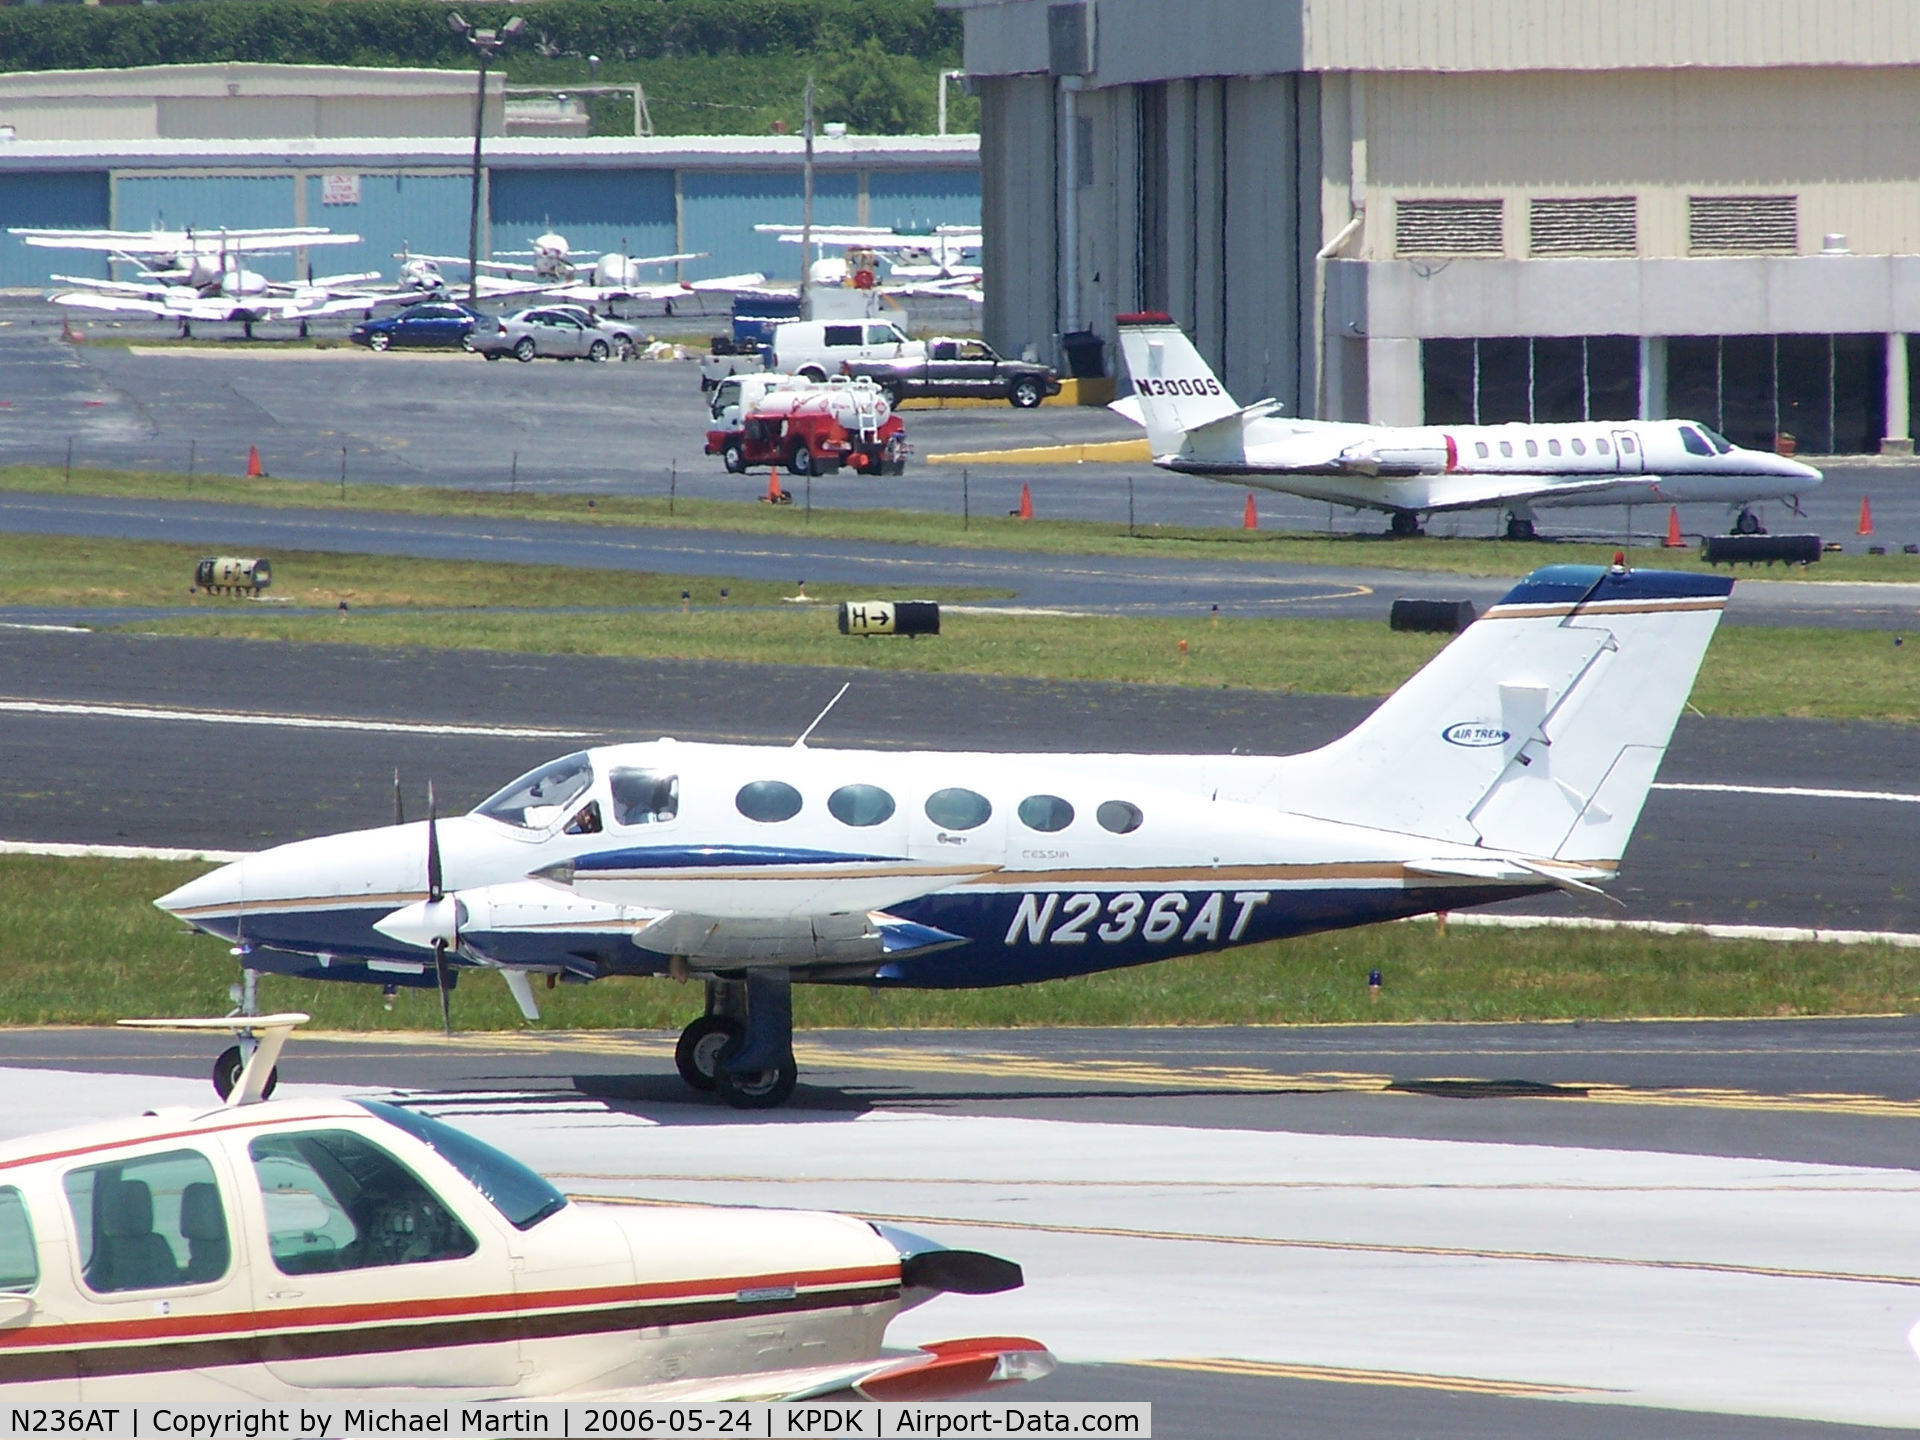 N236AT, 1975 Cessna 414 Chancellor C/N 414-0805, LifeGuard taking to Epps Air Service